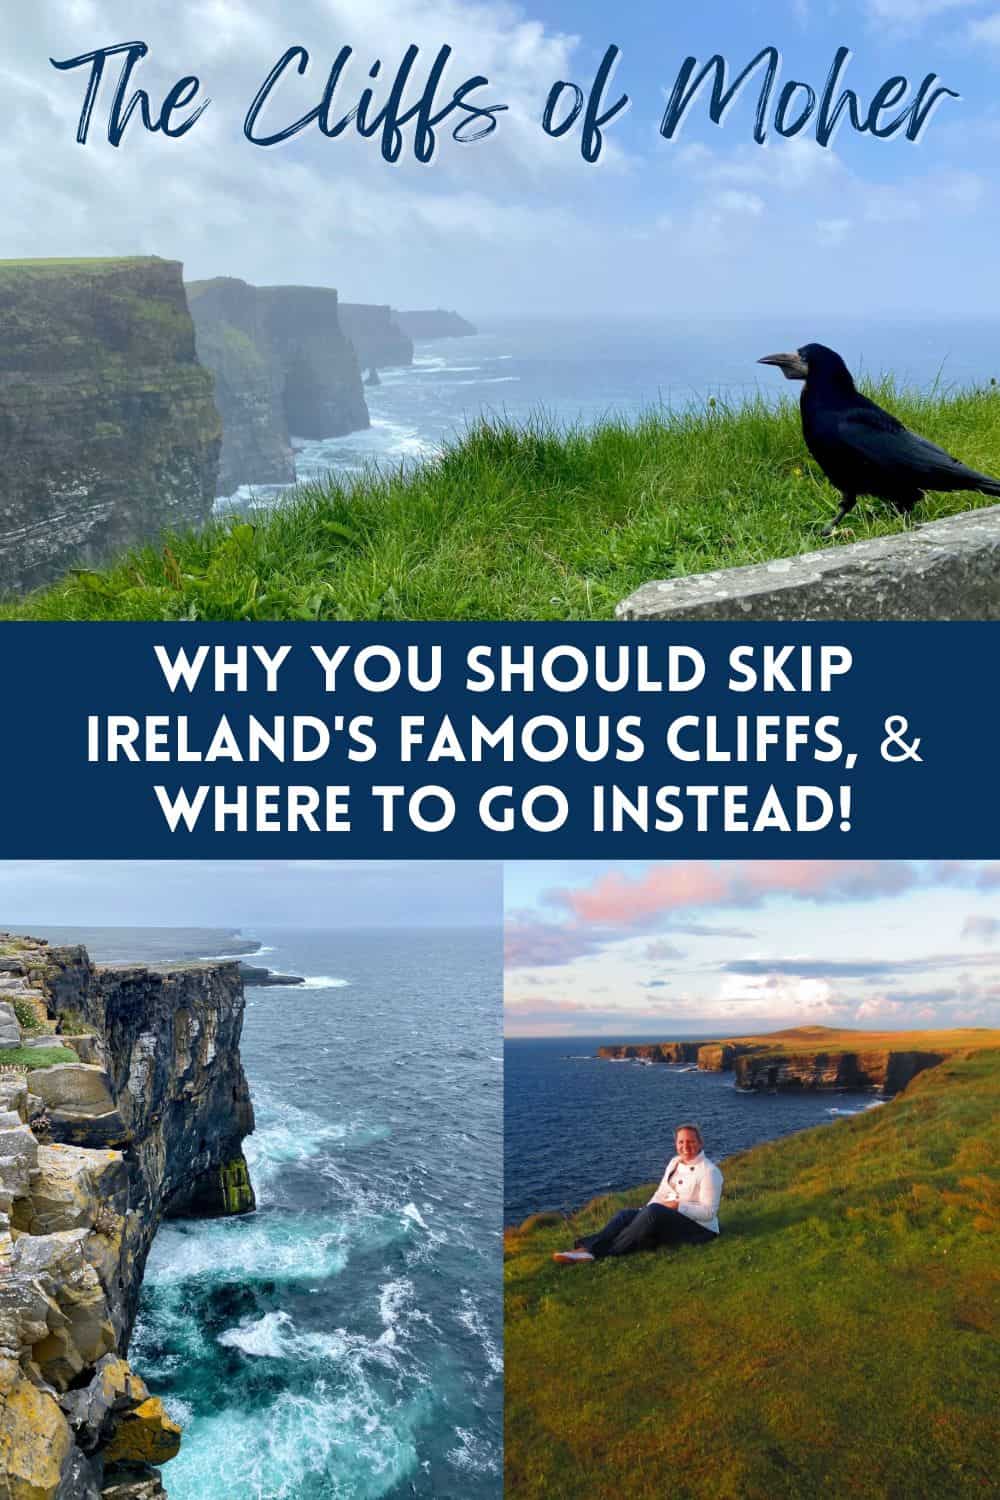 Why You Should Skip the Cliffs of Moher & Where to Go Instead | The Cliffs of Moher are one of Ireland's most iconic tourist sites, but there are way better sea cliff options. How to visit the Cliffs of Moher, & the best alternatives to the Cliffs of Moher. Why Dun Aengus cliffs, Loop Head, Slieve League, & more are way better options. Ireland travel tips, Ireland itinerary, County Clare. #visitireland #ireland #cliffsofmoher #loophead #aranislands